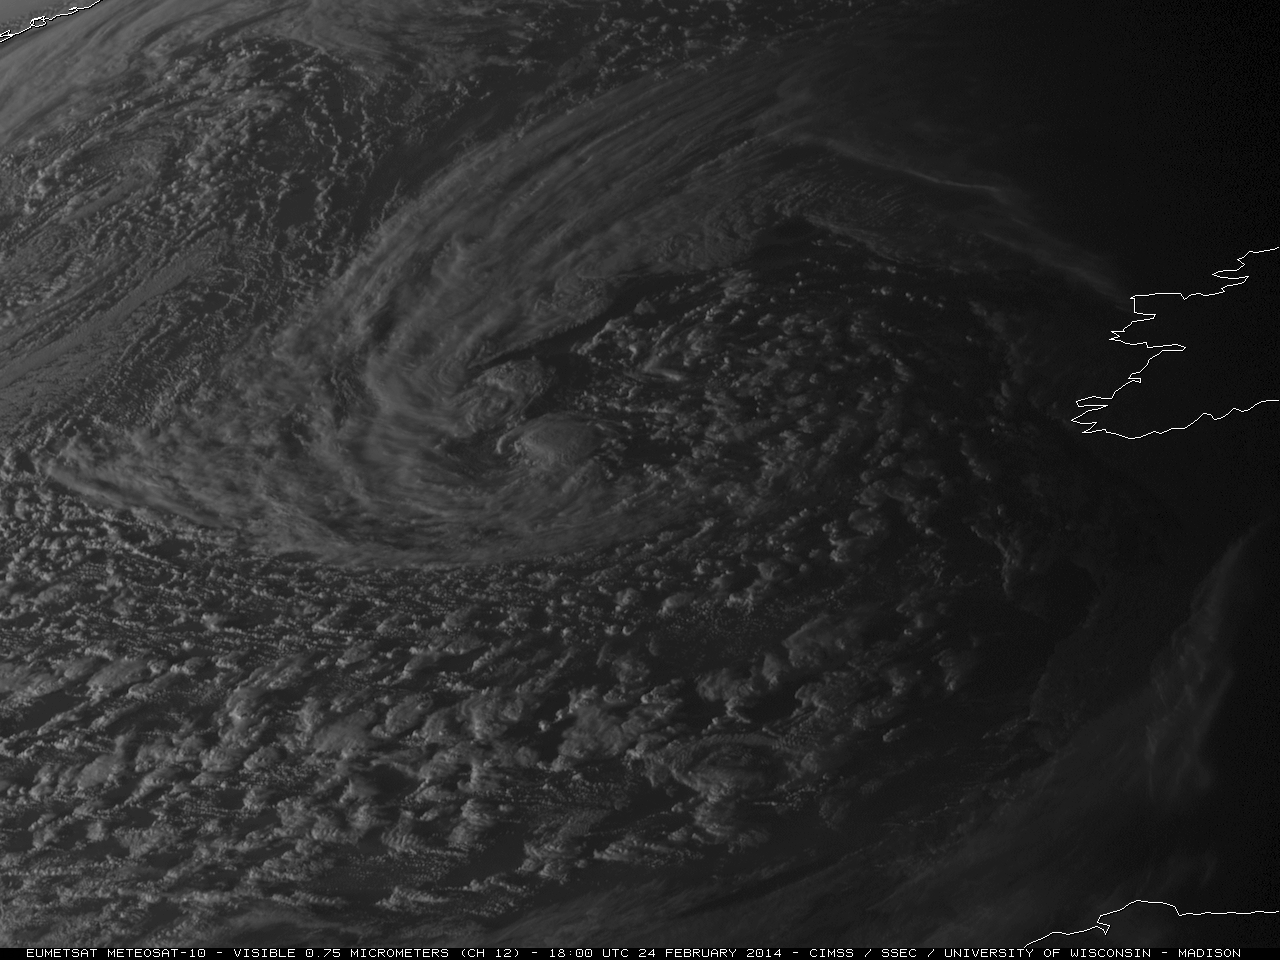 Meteosat-10 0.75 Âµm visible channel and 10.8 Âµm IR channel images at 18:00 UTC